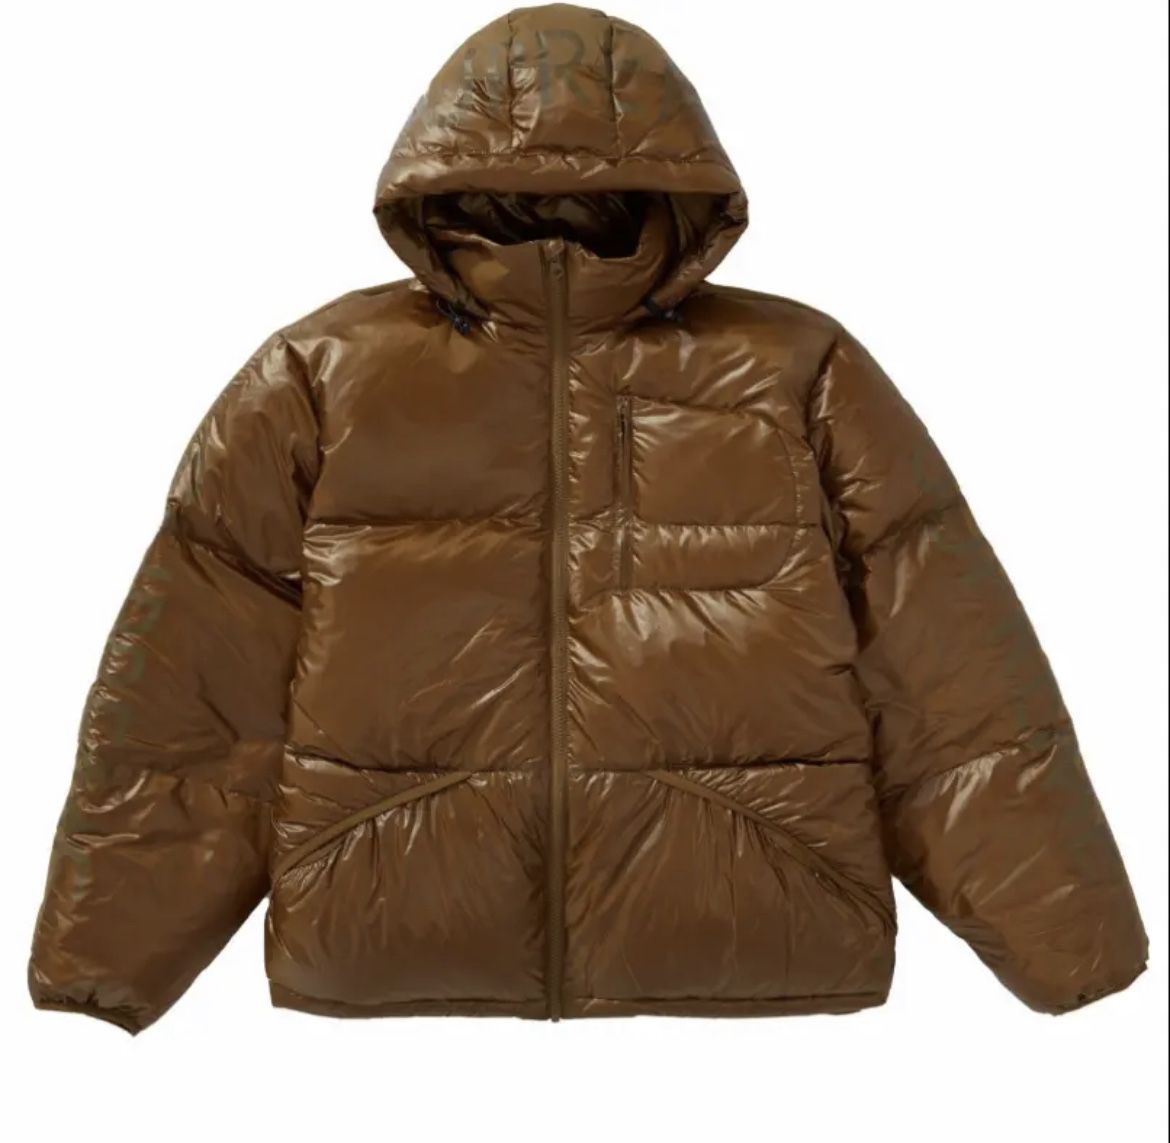 *NEW* Mens Large Supreme Featherweight Down Jacket FW21J24-BROWN